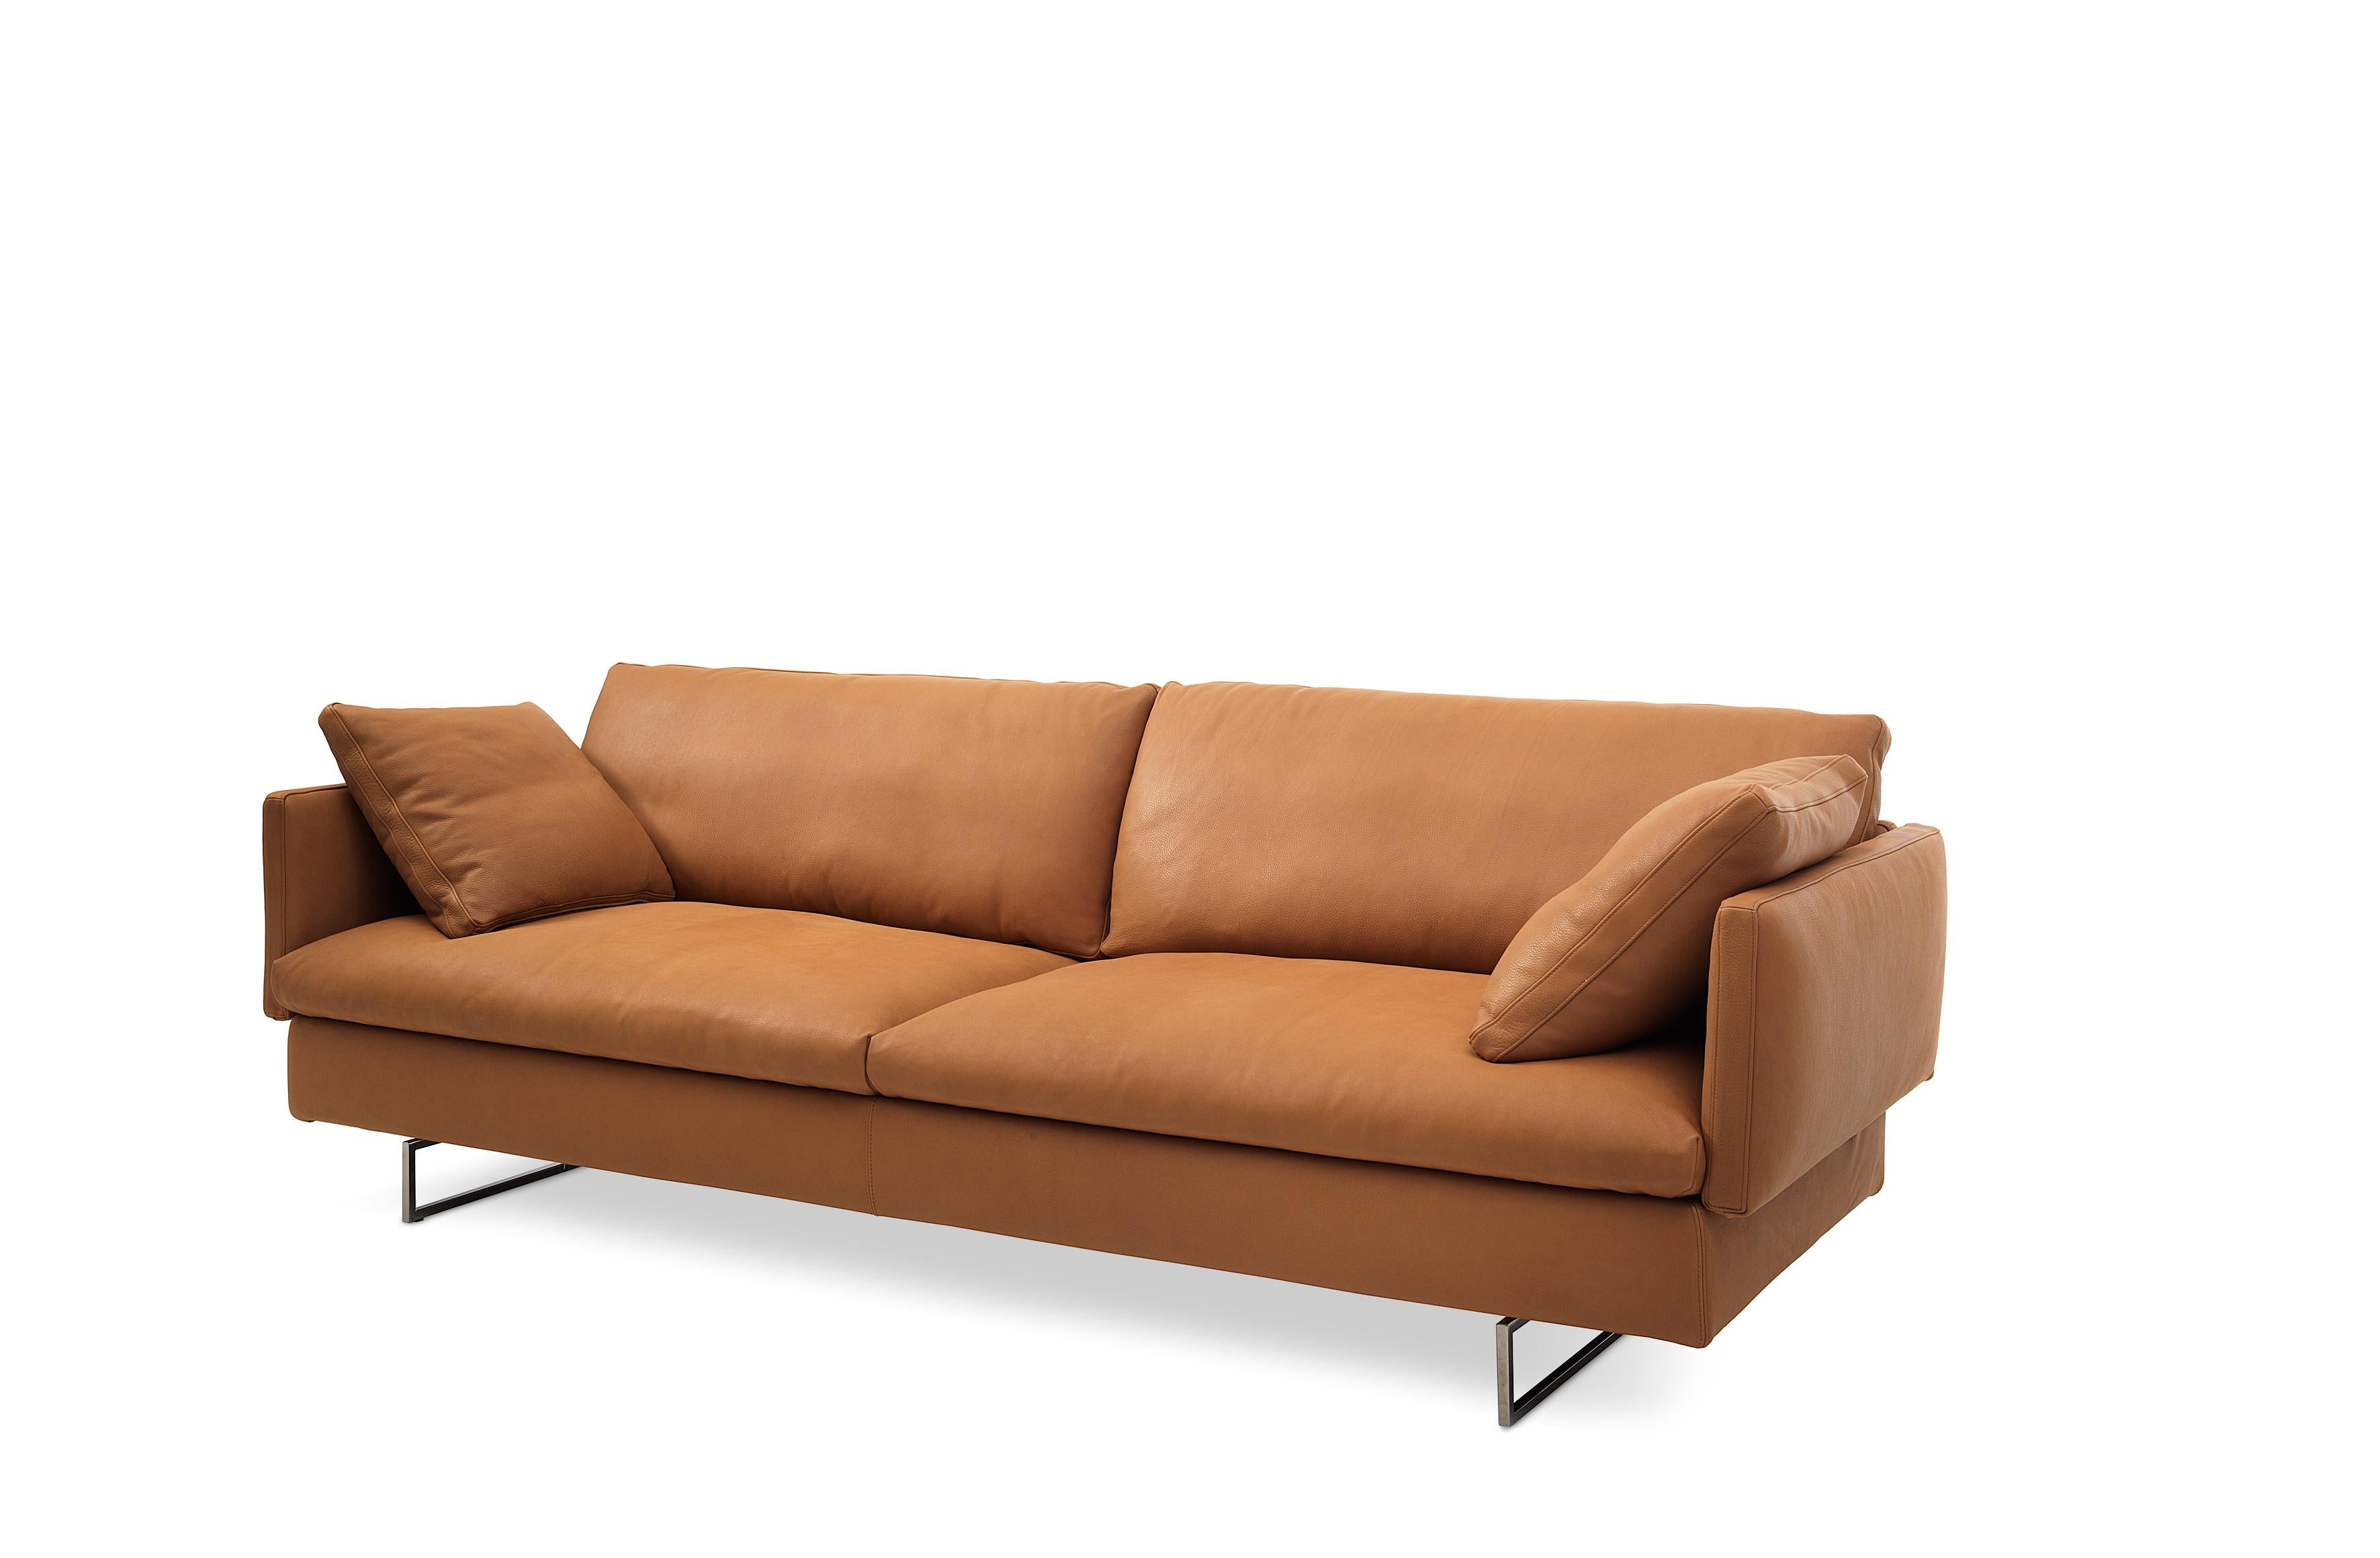 This sofa offers clean lines and an unique flexible design gives a feeling of momentum towards a larger journey. The upholstery options are essential and contemporary, eclectic and give character. Voyage can be assembled and
re-assembled with